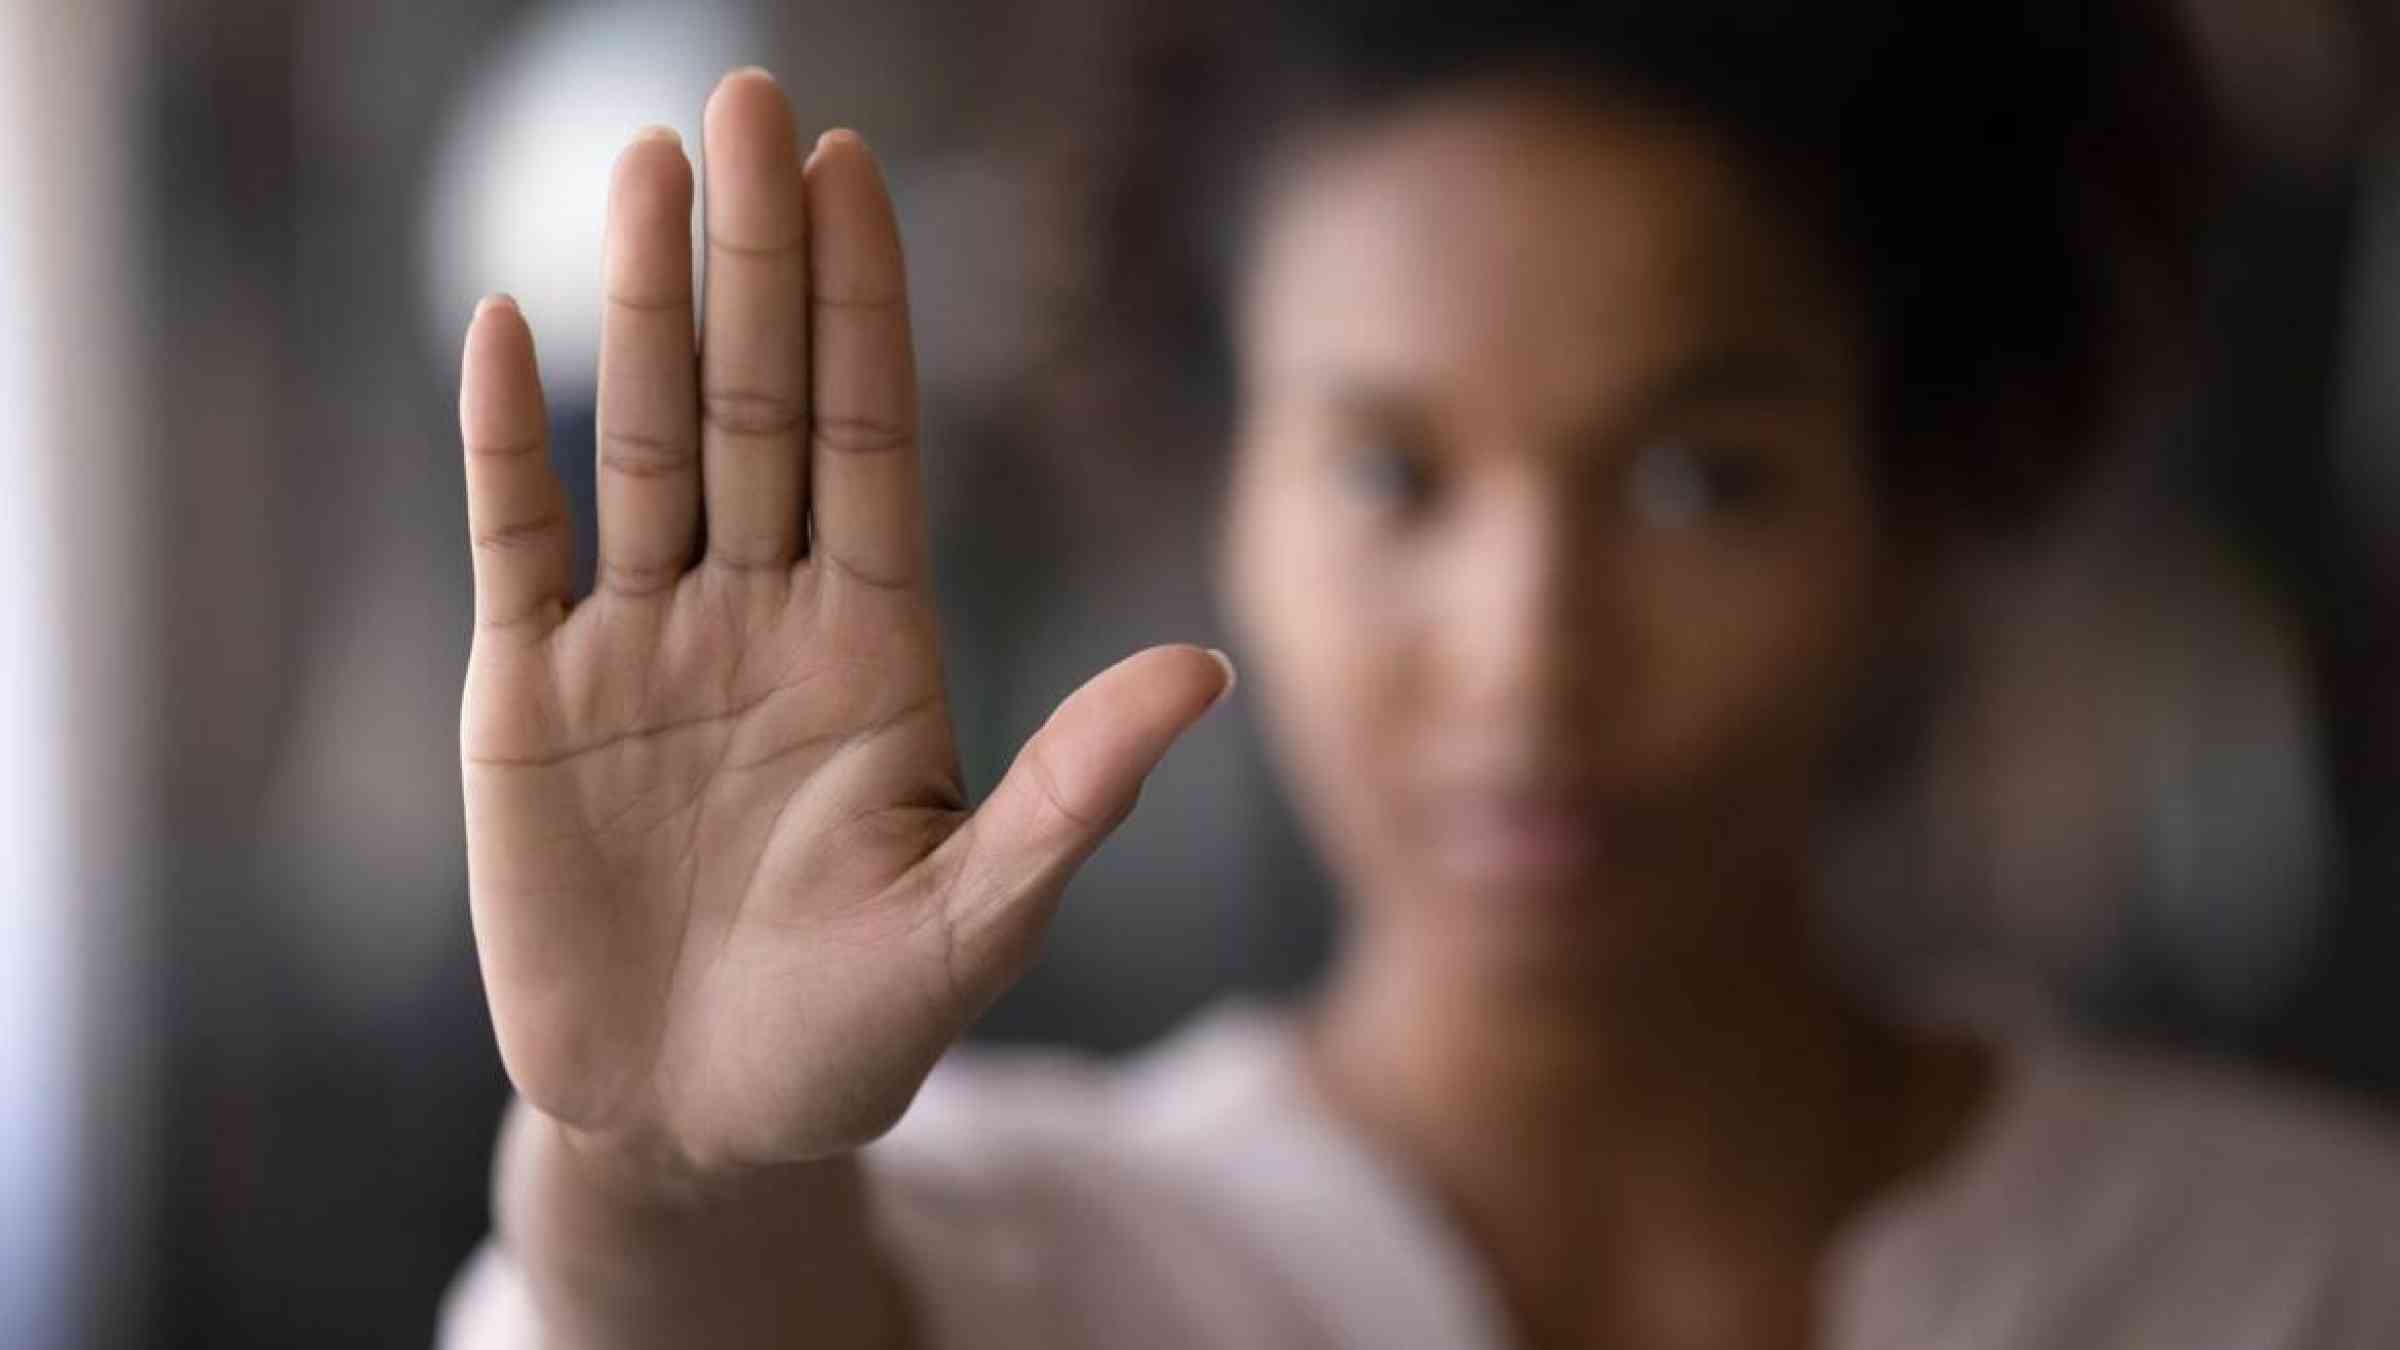 Woman raising her hand against domestic violence